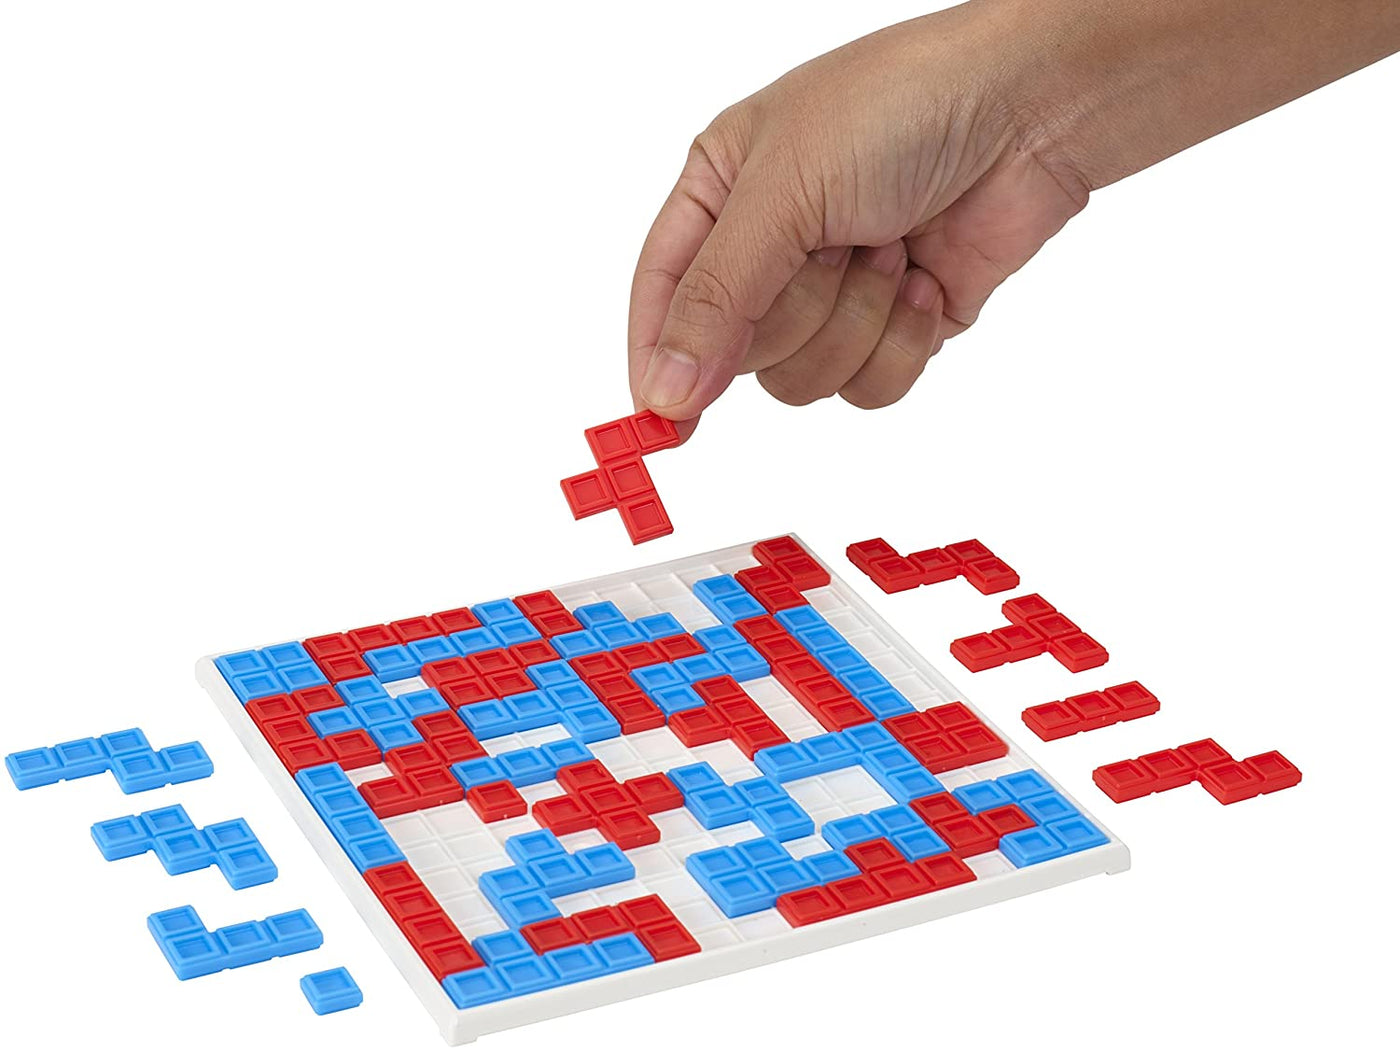 Blokus- Fast Fun Game (One Rule endless Possibilities!) | Mattel Games